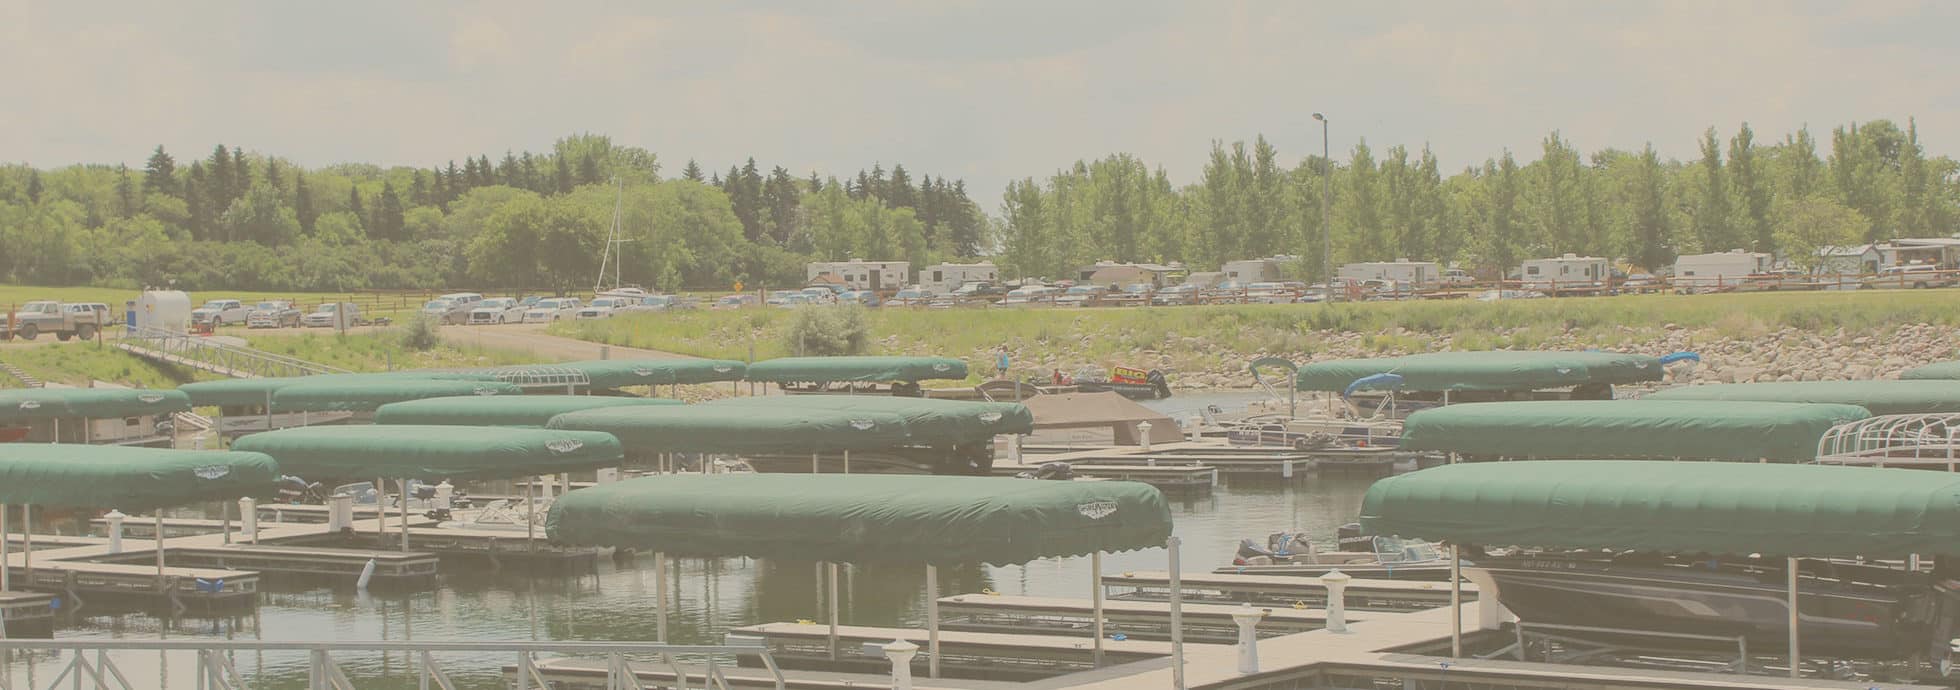 A view of the Eastbay Campground boat dock and marina with many covered slips available for boats.